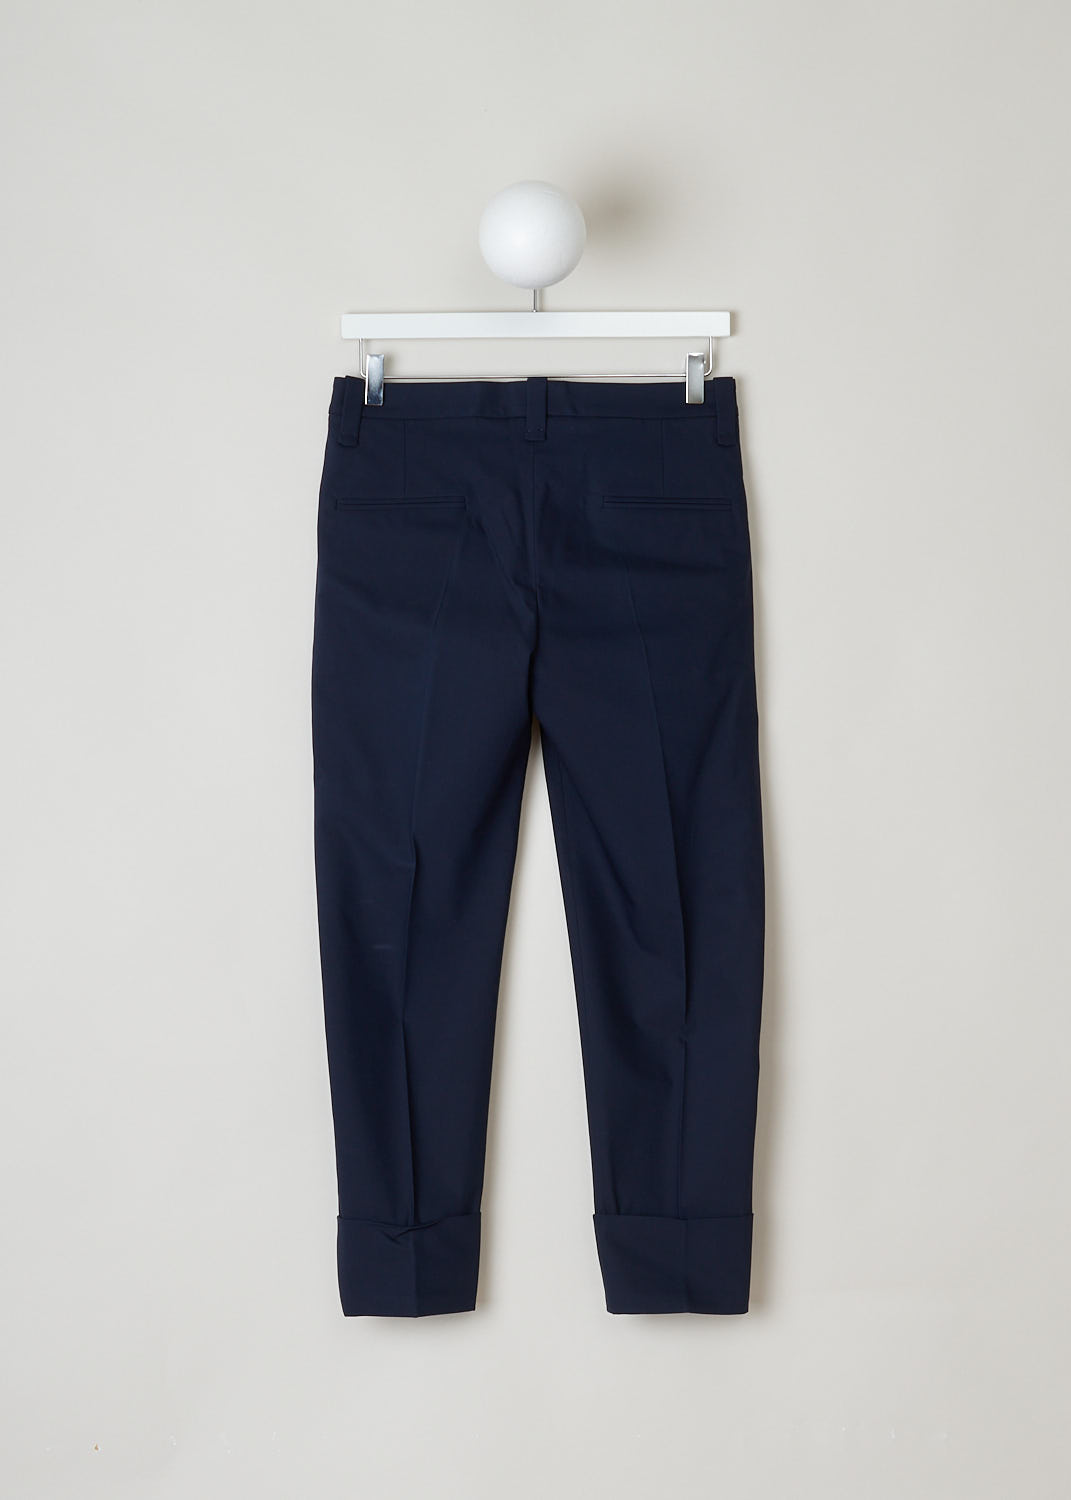 Brunello Cucinelli, Navy chino with fold-over hem, M0F70P1367_C7040, blue, back, A navy chino made of a cotton blend. Featuring forward slanted pockets on the front, and two welt pockets on the back. furthermore the belt loops are a bit broader then usual. 